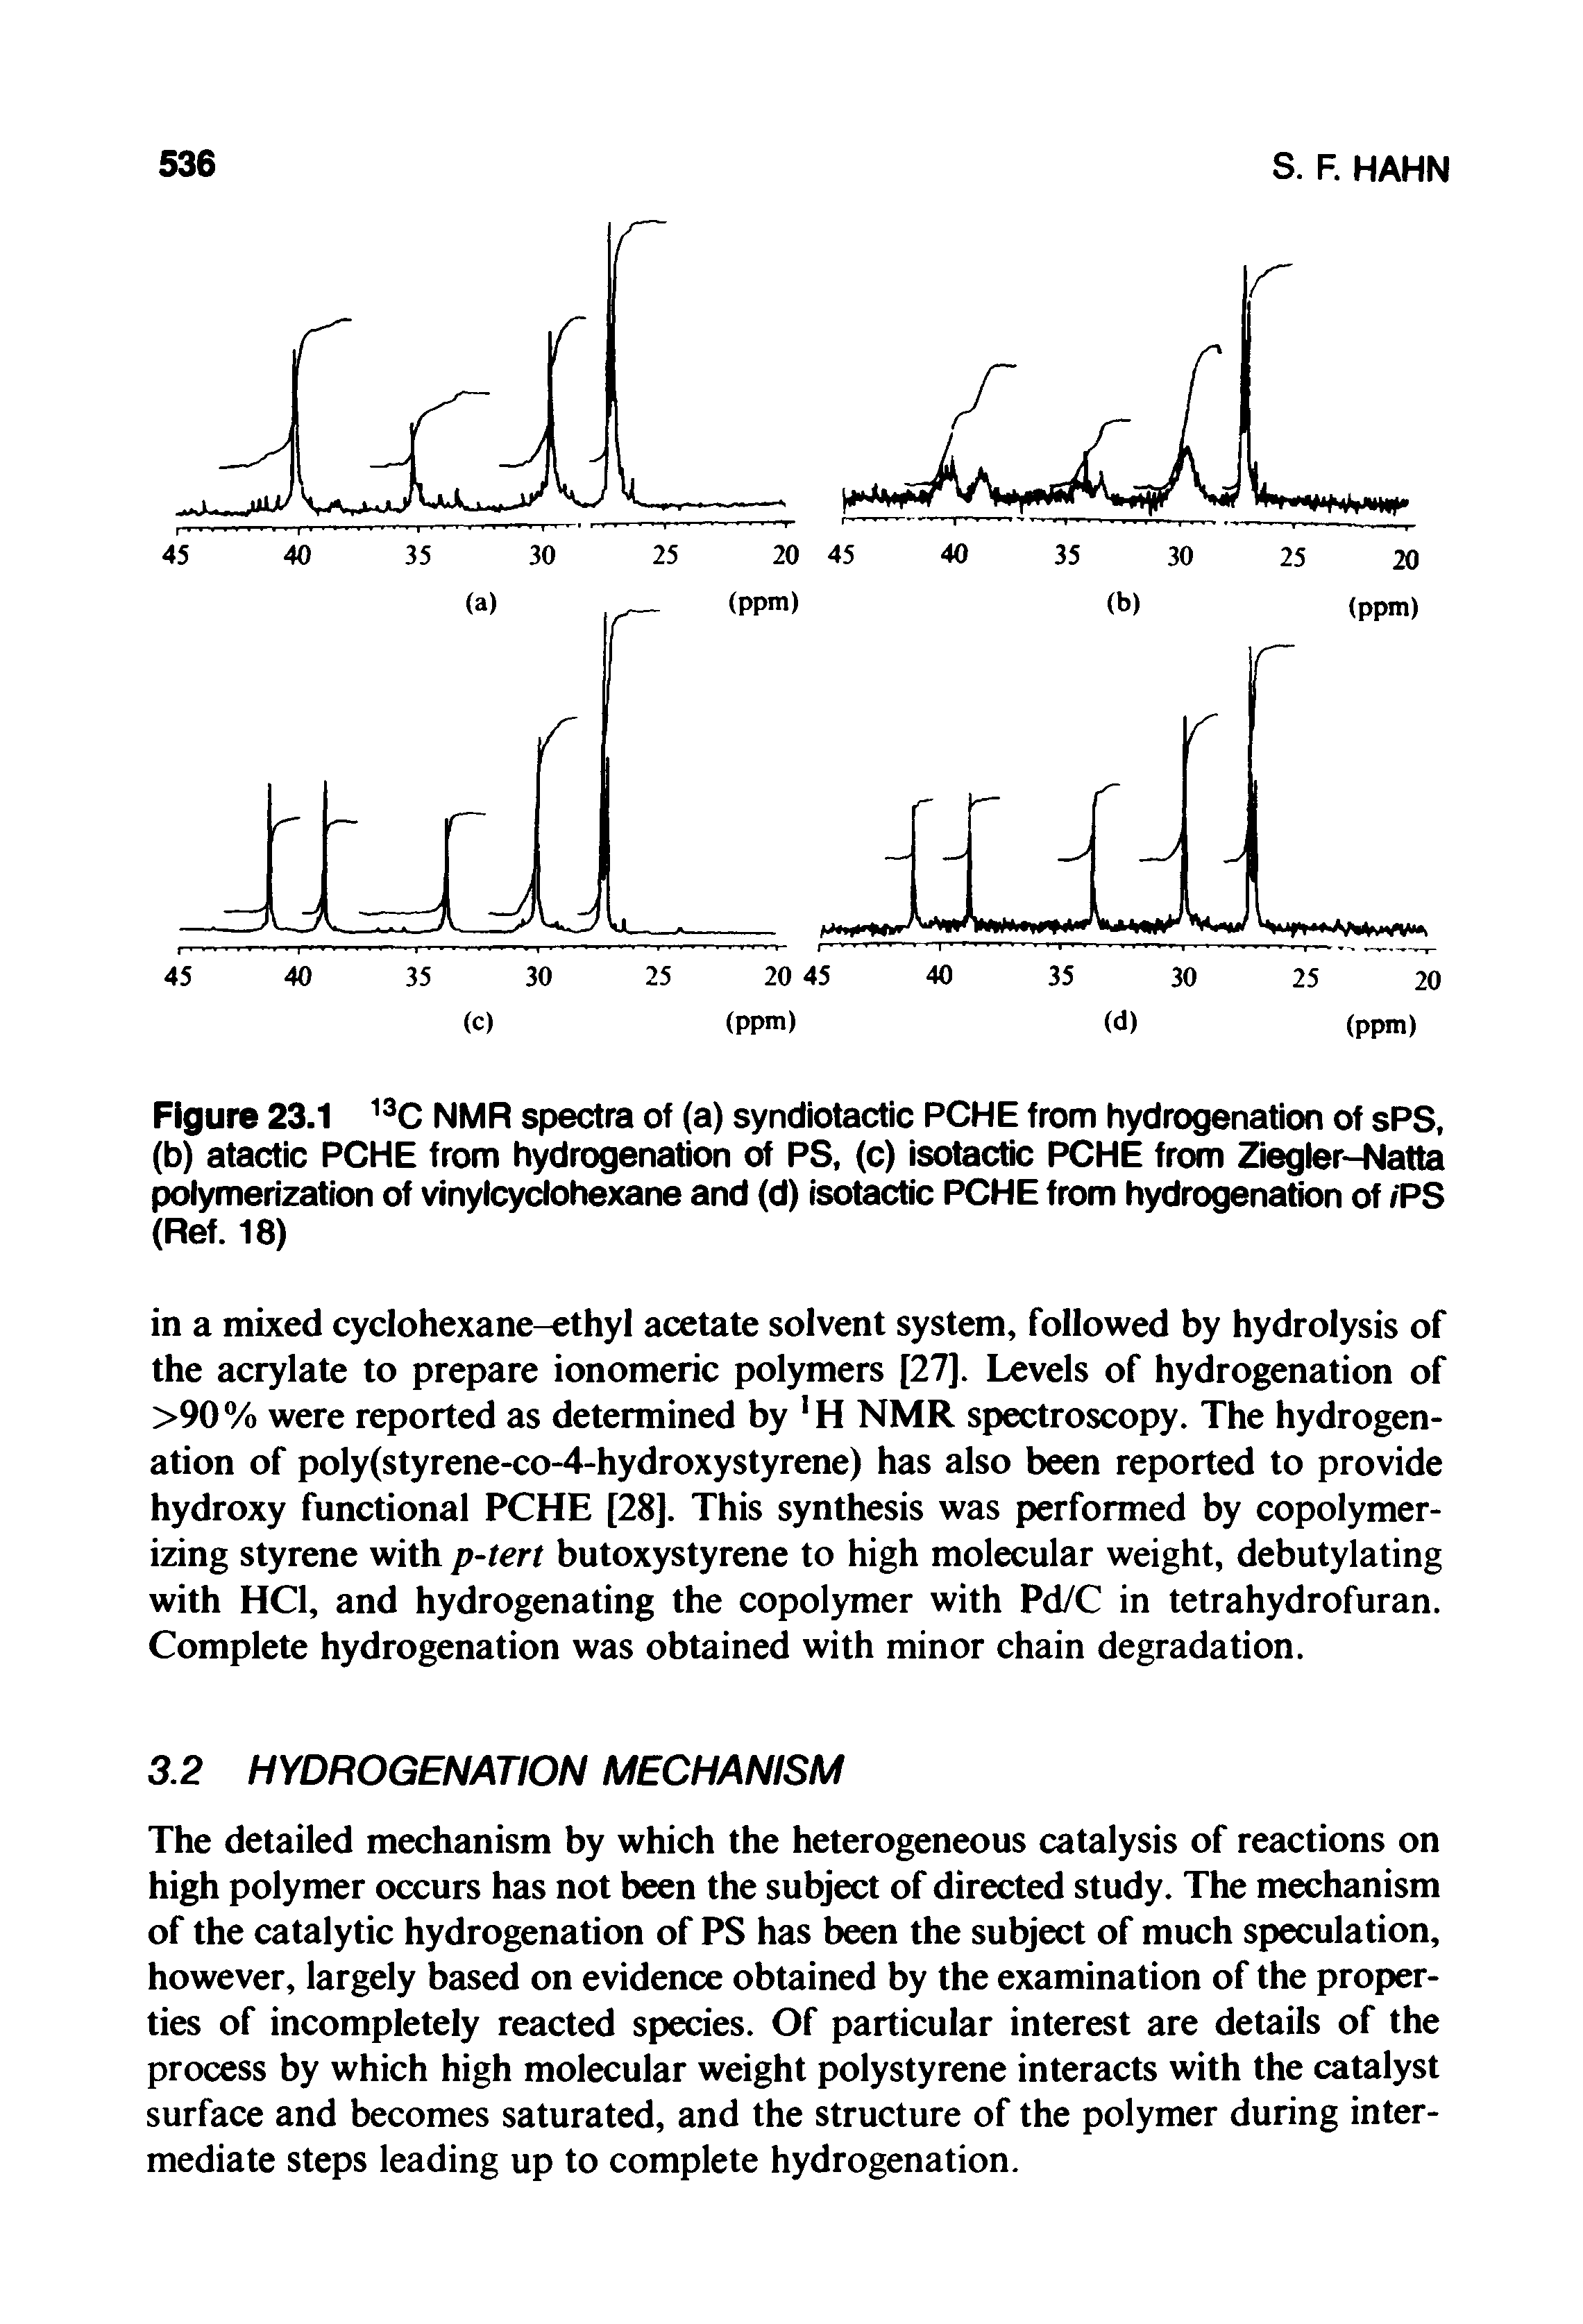 Figure 23.1 13C NMR spectra of (a) syndiotactic PCHE from hydrogenation of sPS, (b) atactic PCHE from hydrogenation of PS, (c) isotactic PCHE from Ziegler-Natta polymerization of vinylcyclohexane and (d) isotactic PCHE from hydrogenation of /PS (Ref. 18)...